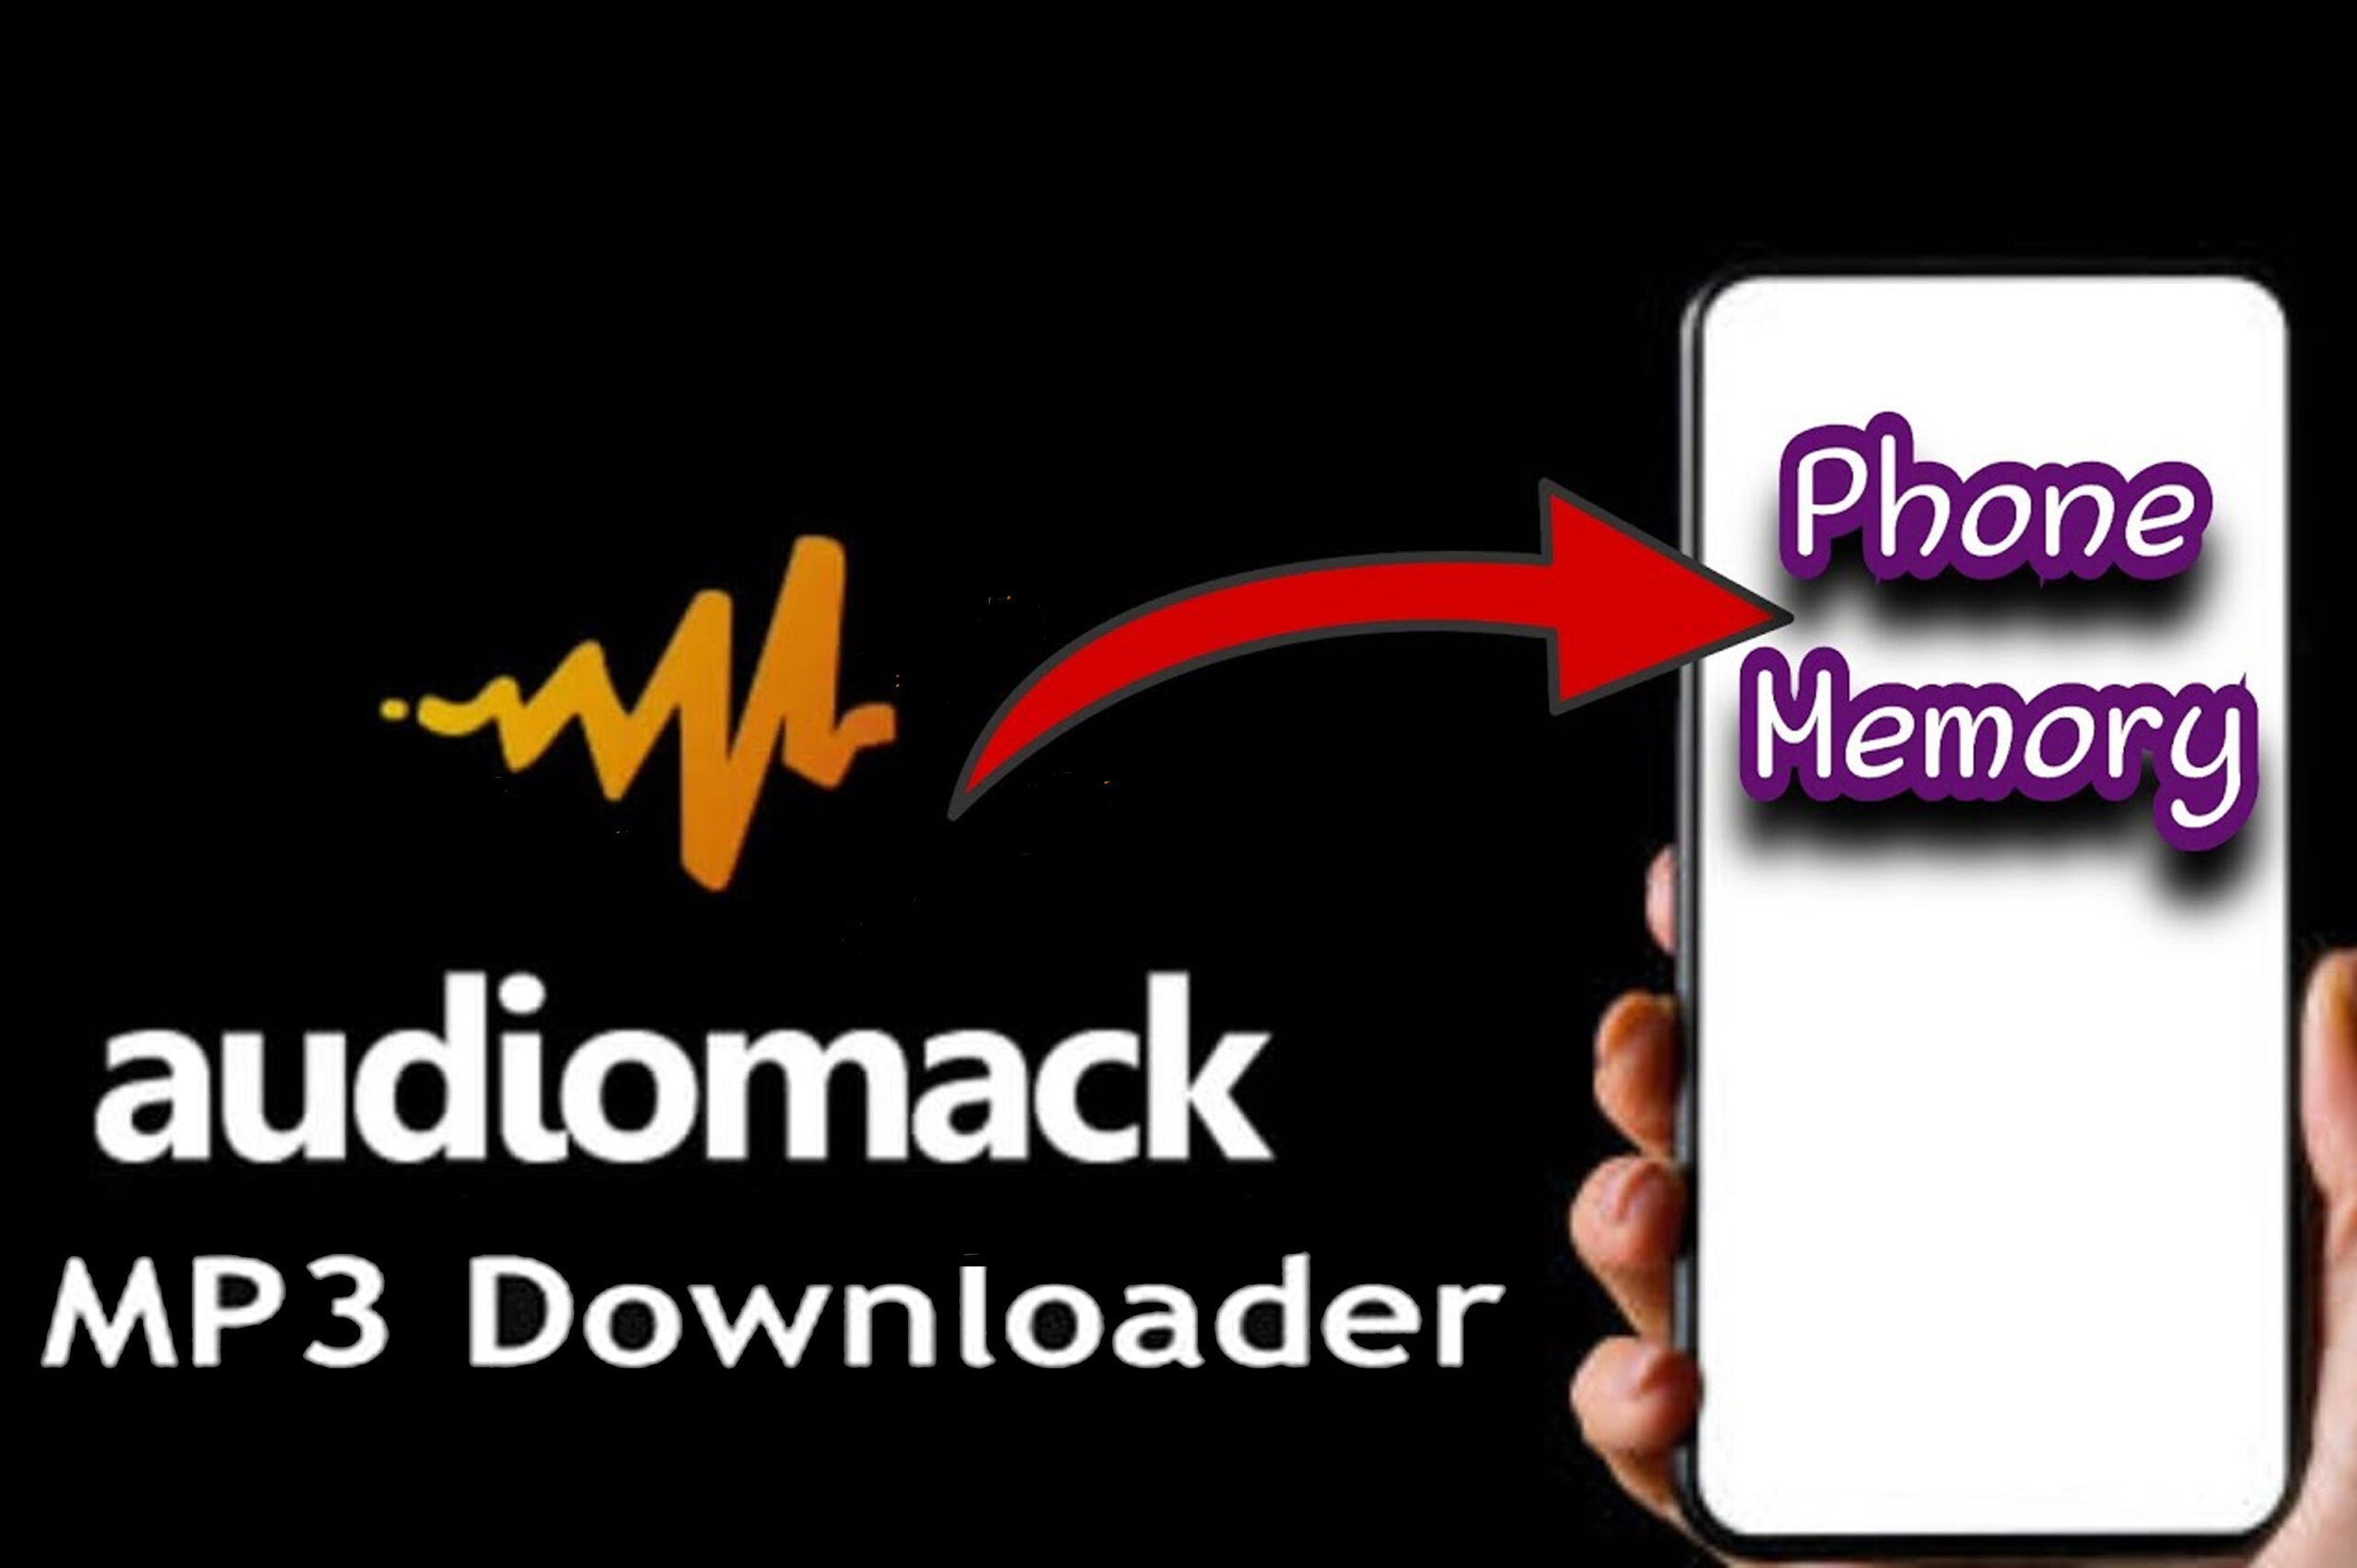 How to Download and Transfer Songs From Audiomack to Phone Storage